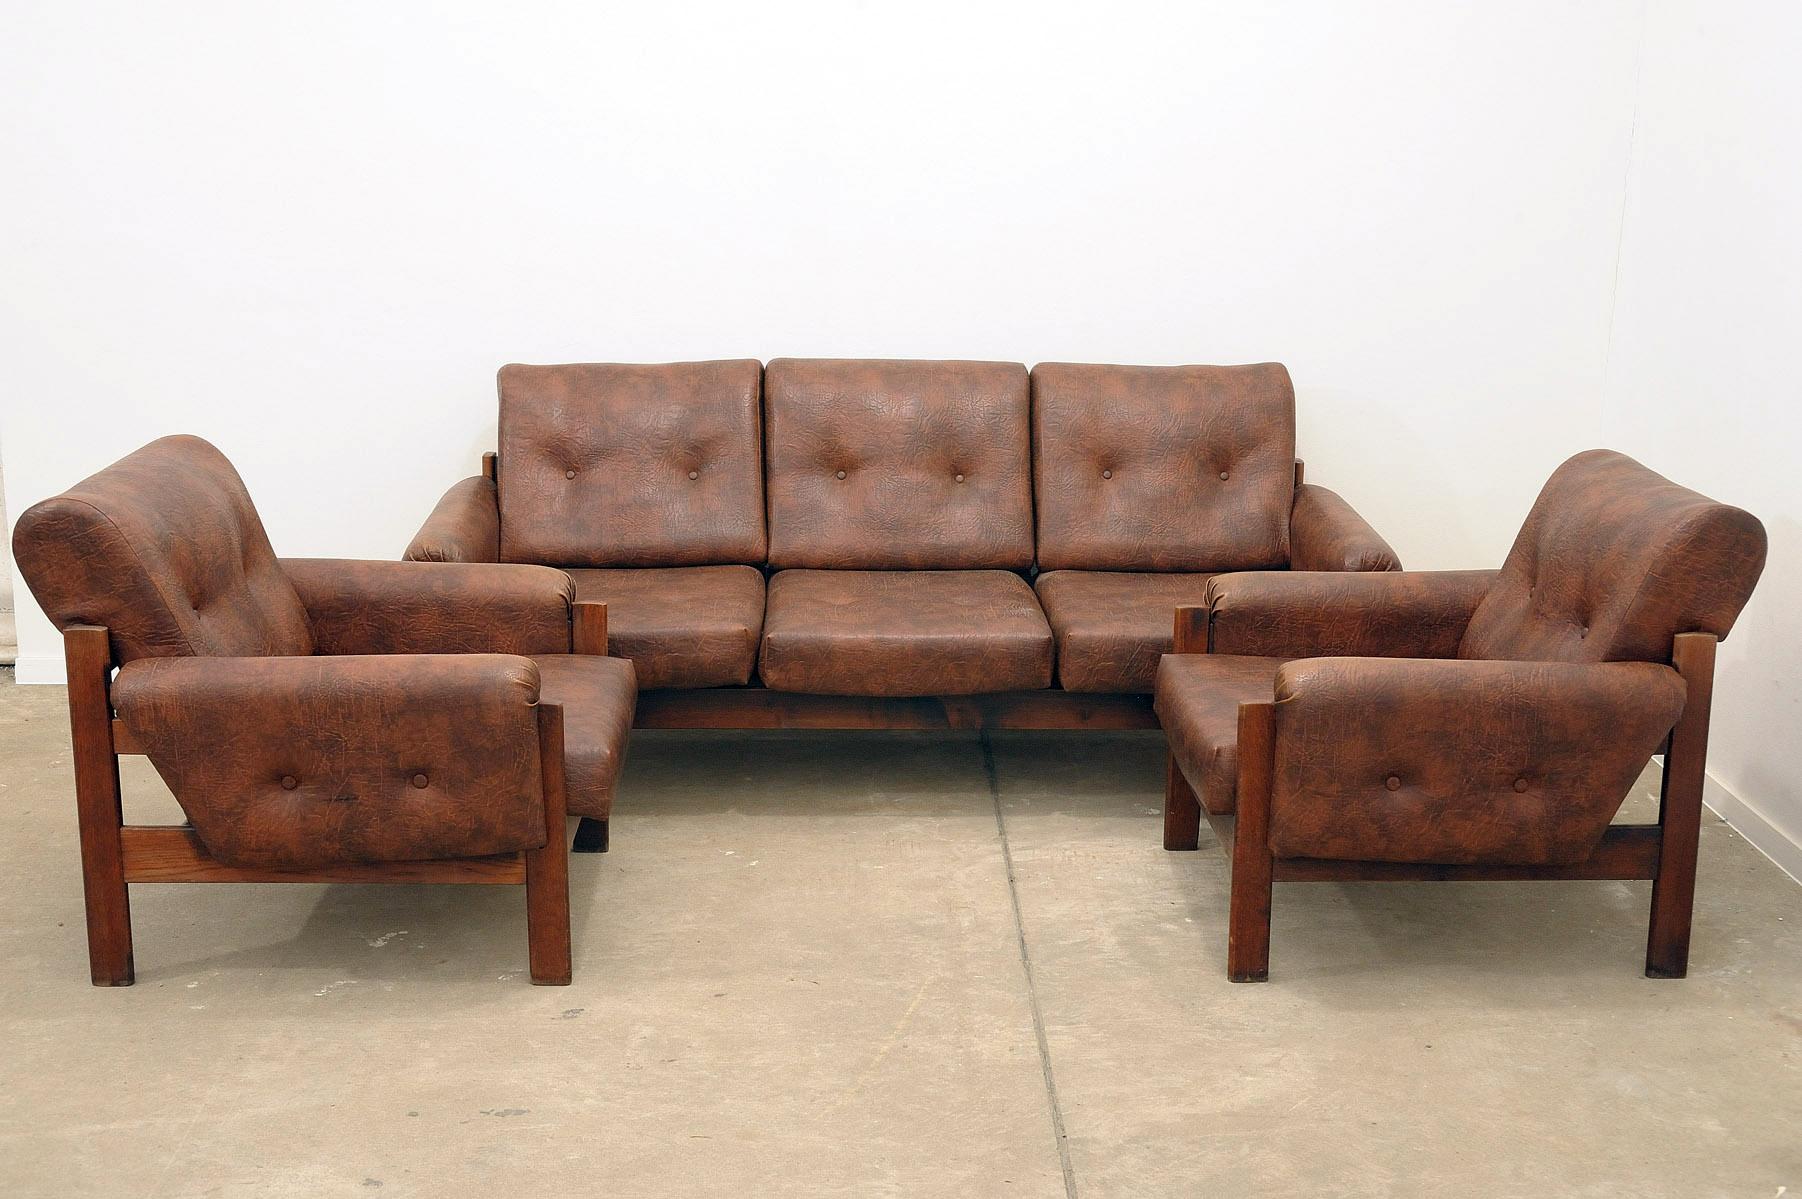 This leatherette living room set is a typical example of furniture design of the 1970/1980´s
It was made in Czechoslovakia.
The furniture is in very good Vintage condition, showing slight signs of age and using.

Dimensions of the sofa:

Lenght: 200